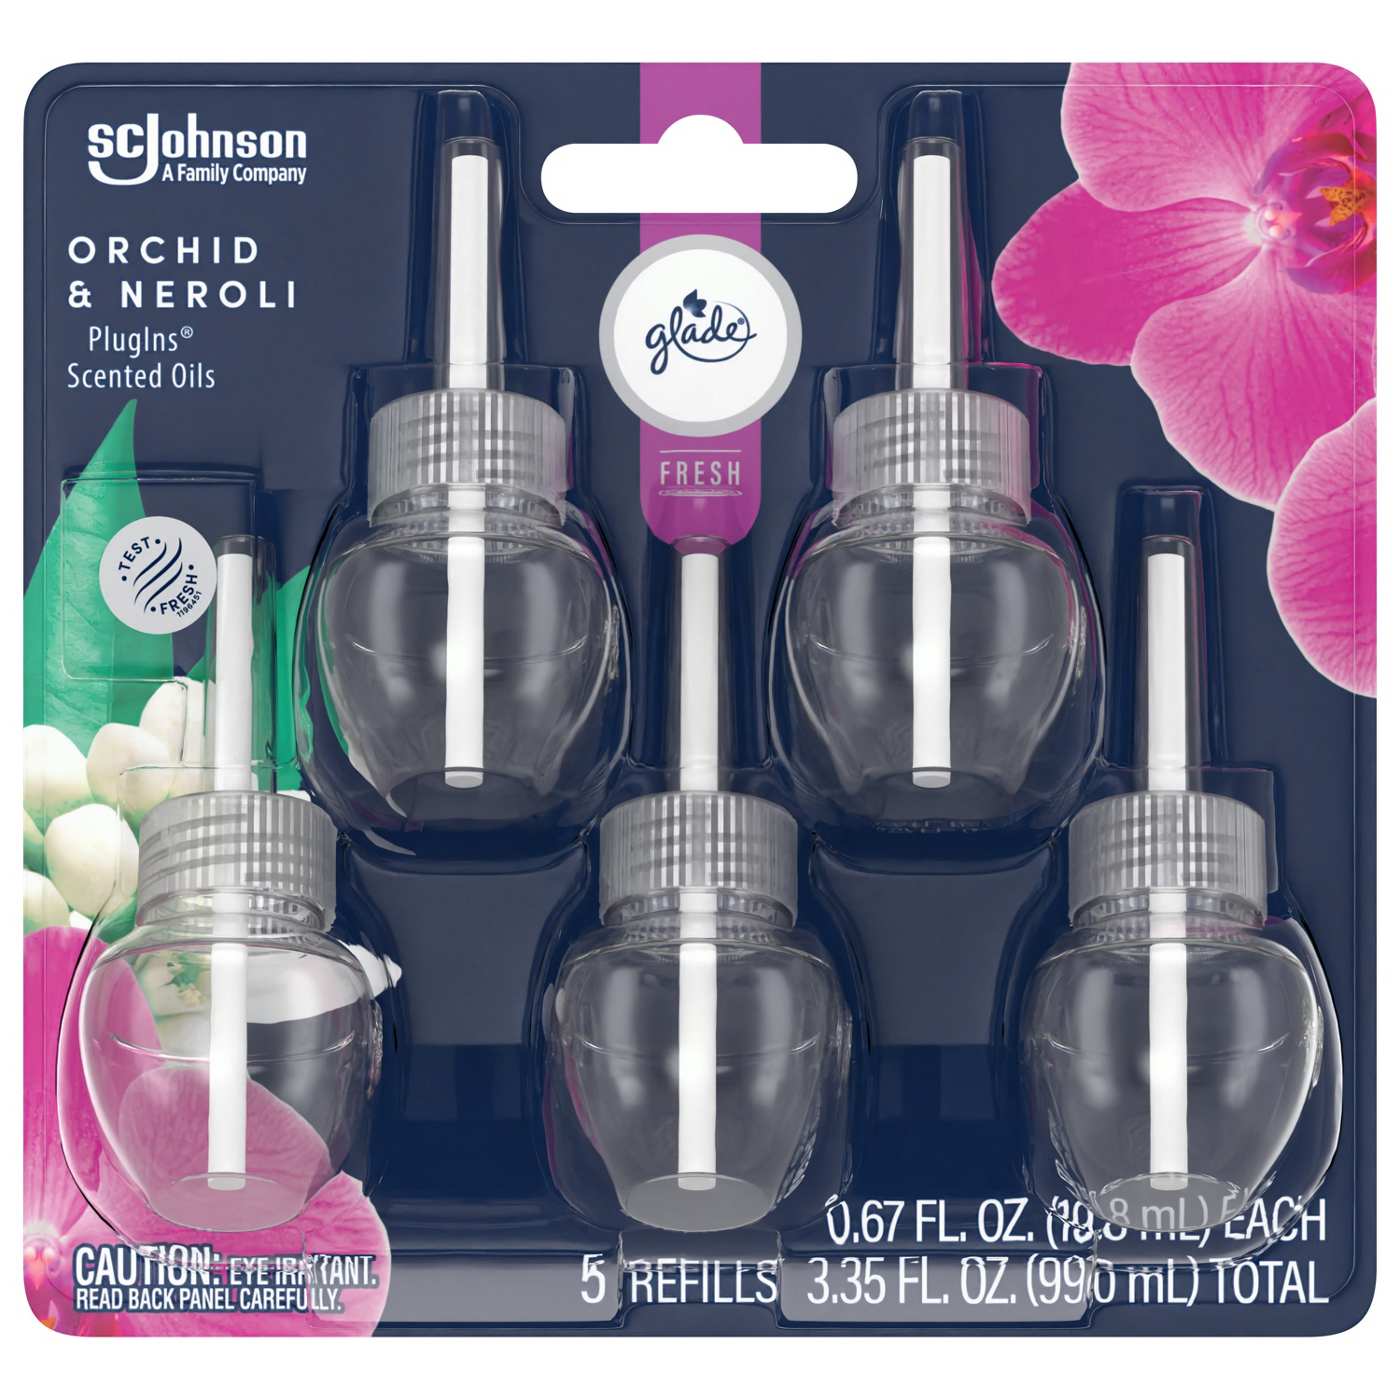 Glade PlugIns Scented Oil Refills - Orchid & Neroli; image 1 of 2